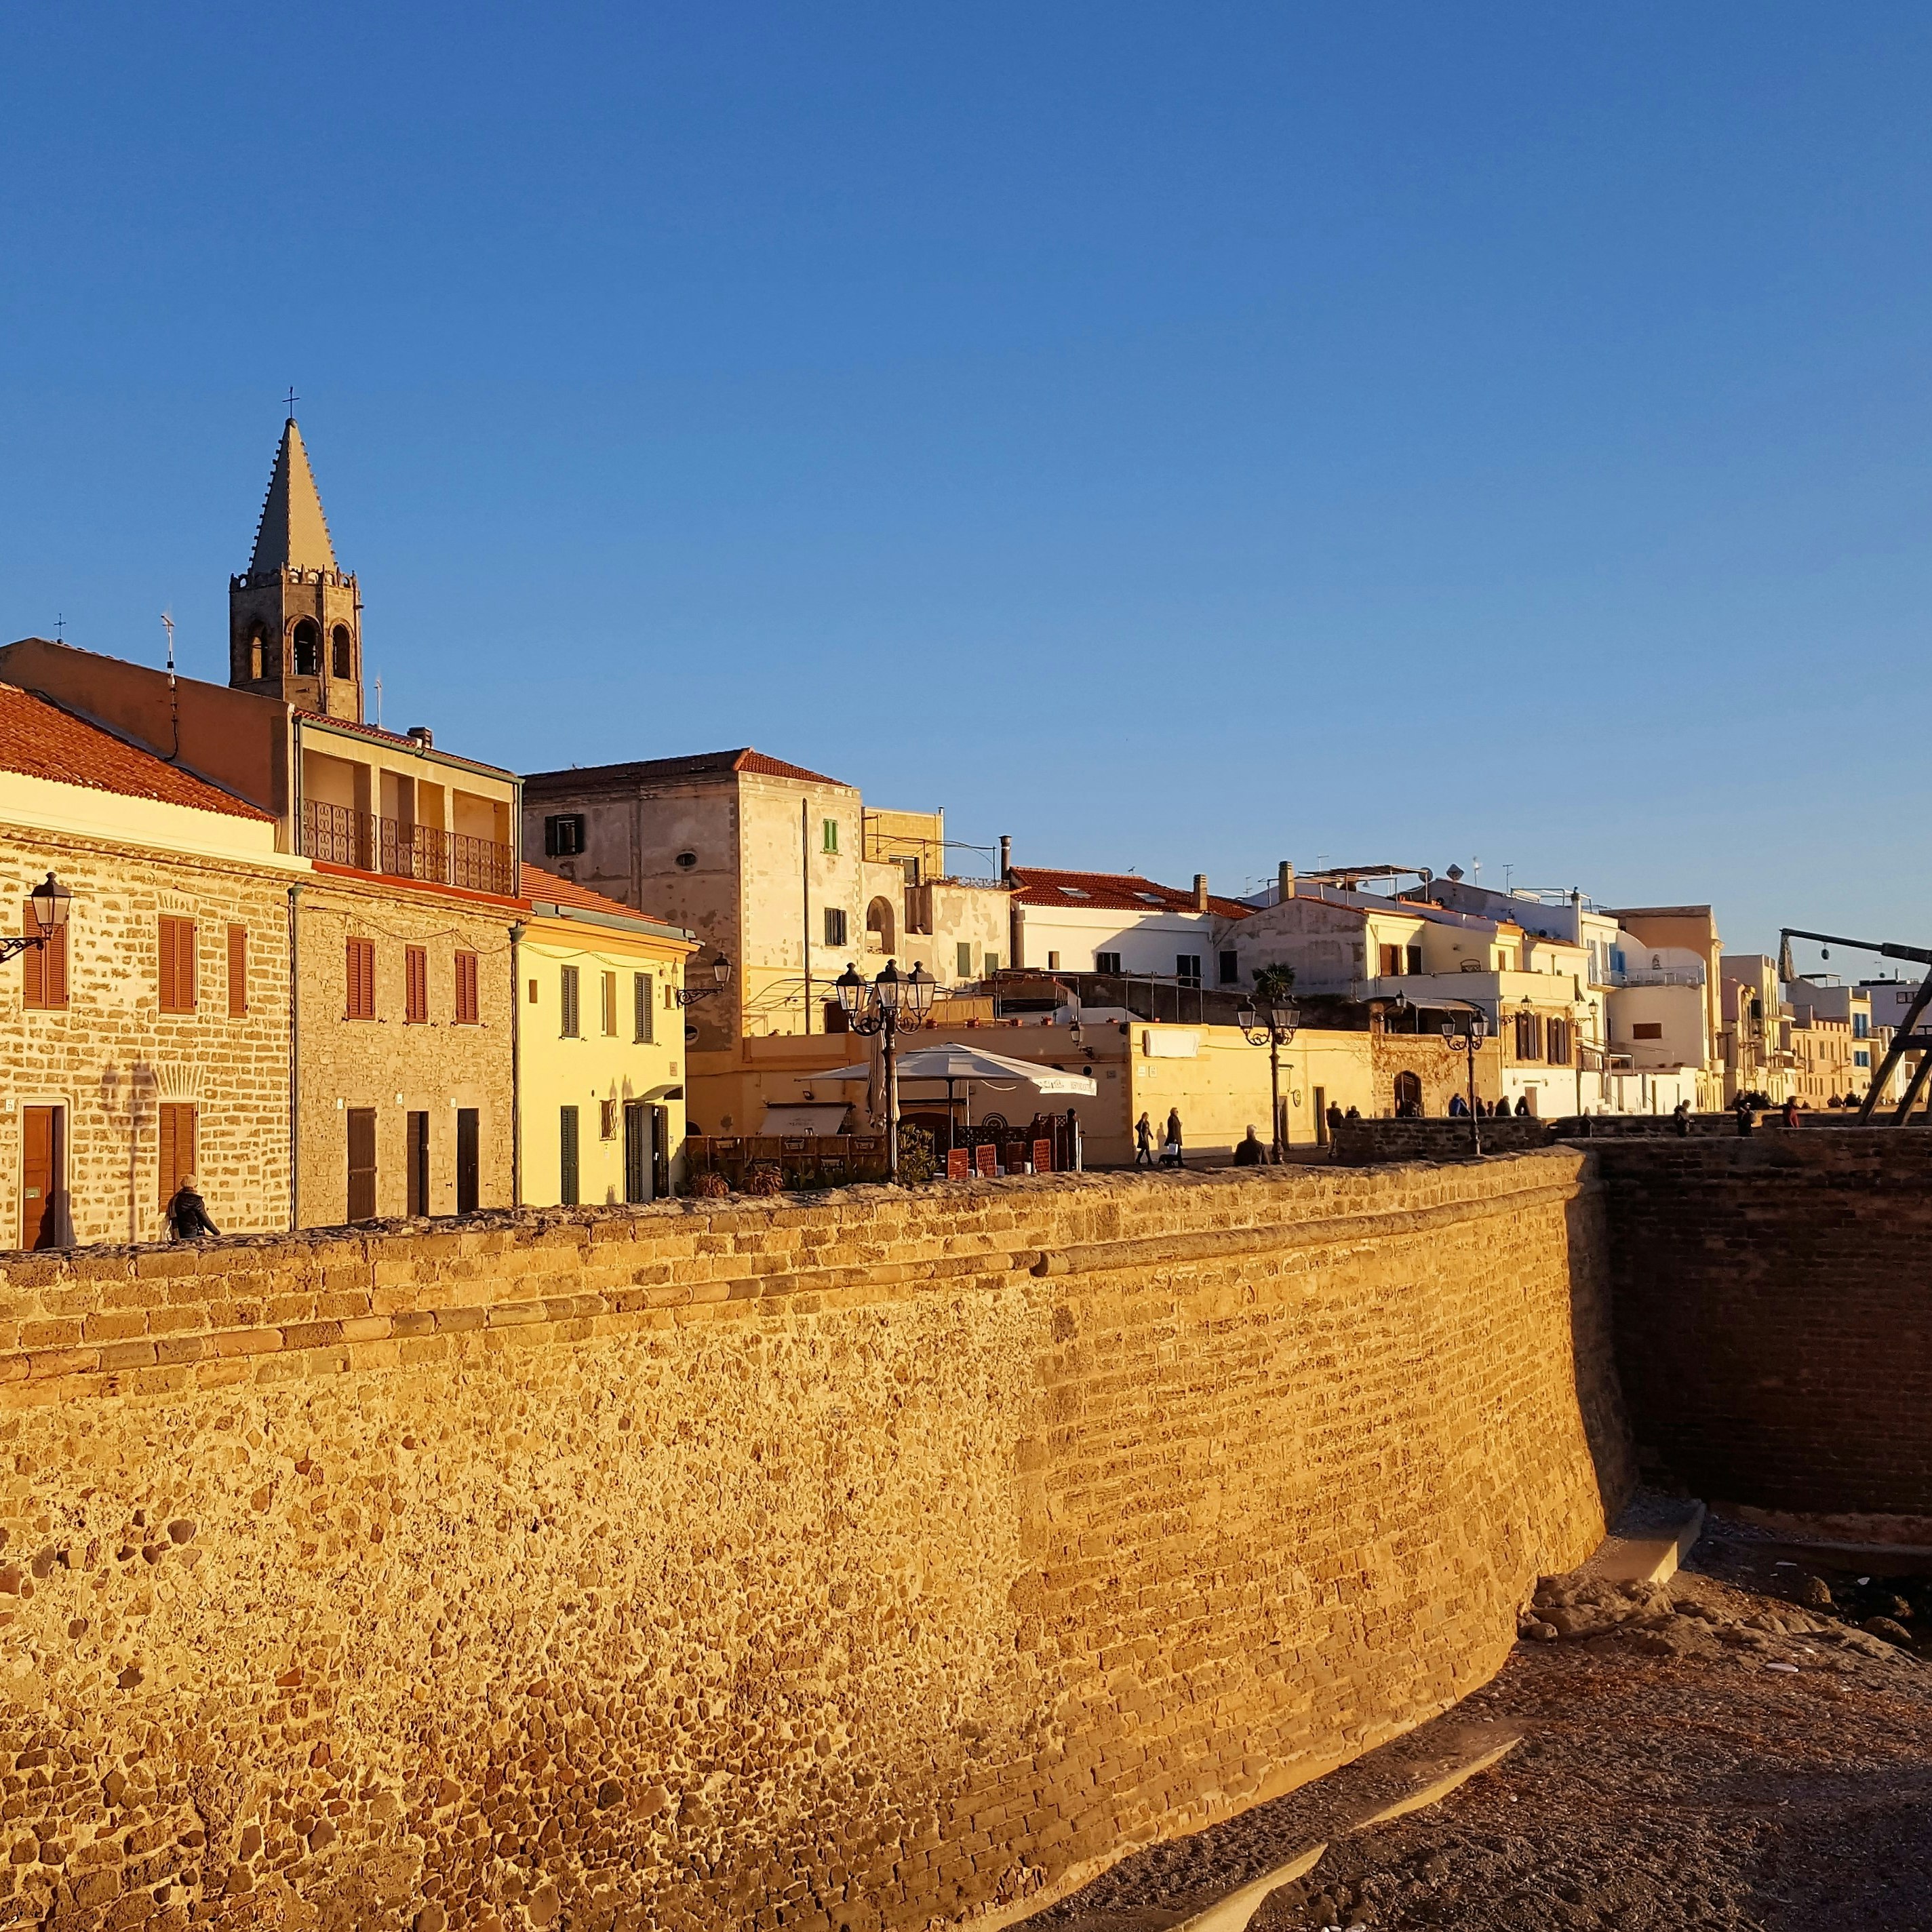 Sea wall of Alghero. North of Sardinia. Itlay.Alghero's golden sea walls, built around the centro storico by the Aragonese in the 16th century, are a highlight of the town's historic cityscape.; Shutterstock ID 576280477; Your name (First / Last): Anna Tyler; GL account no.: 65050; Netsuite department name: Online Editorial; Full Product or Project name including edition: destination-image-southern-europe